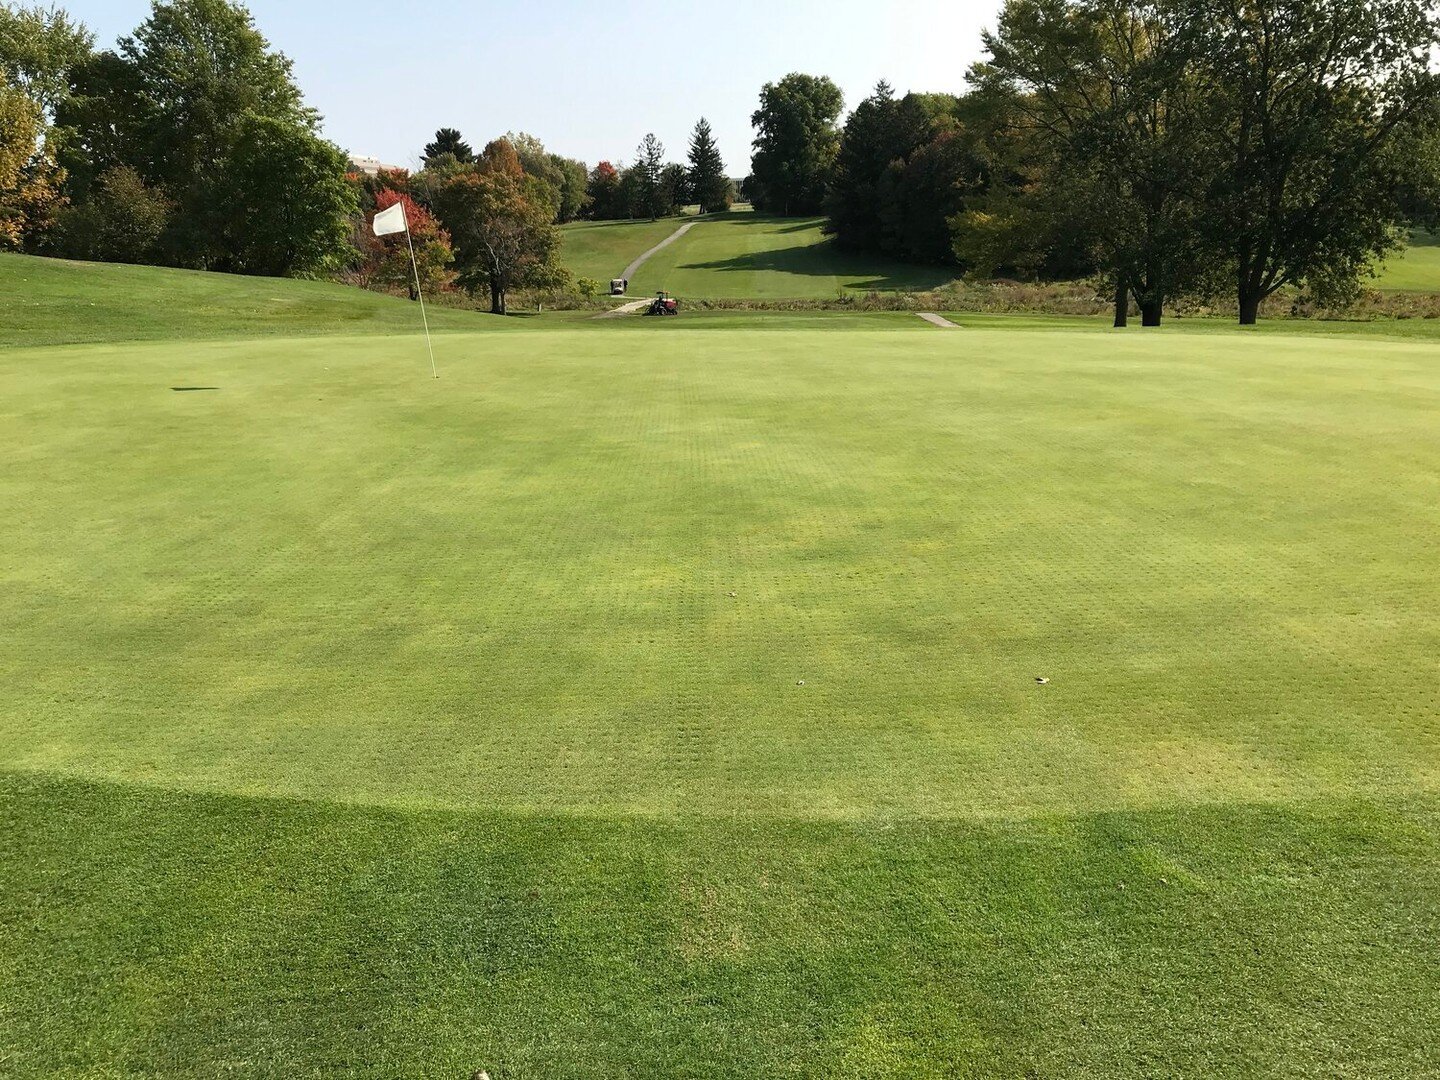 Turf grass management is a disciplined and precise science, and involves a lot more than mowing to manage all the grass. To know the basics of turfgrass management, read our blog. Link in bio! 

#golfmaintenance #golf #golfcourse #greenkeeping #golfc